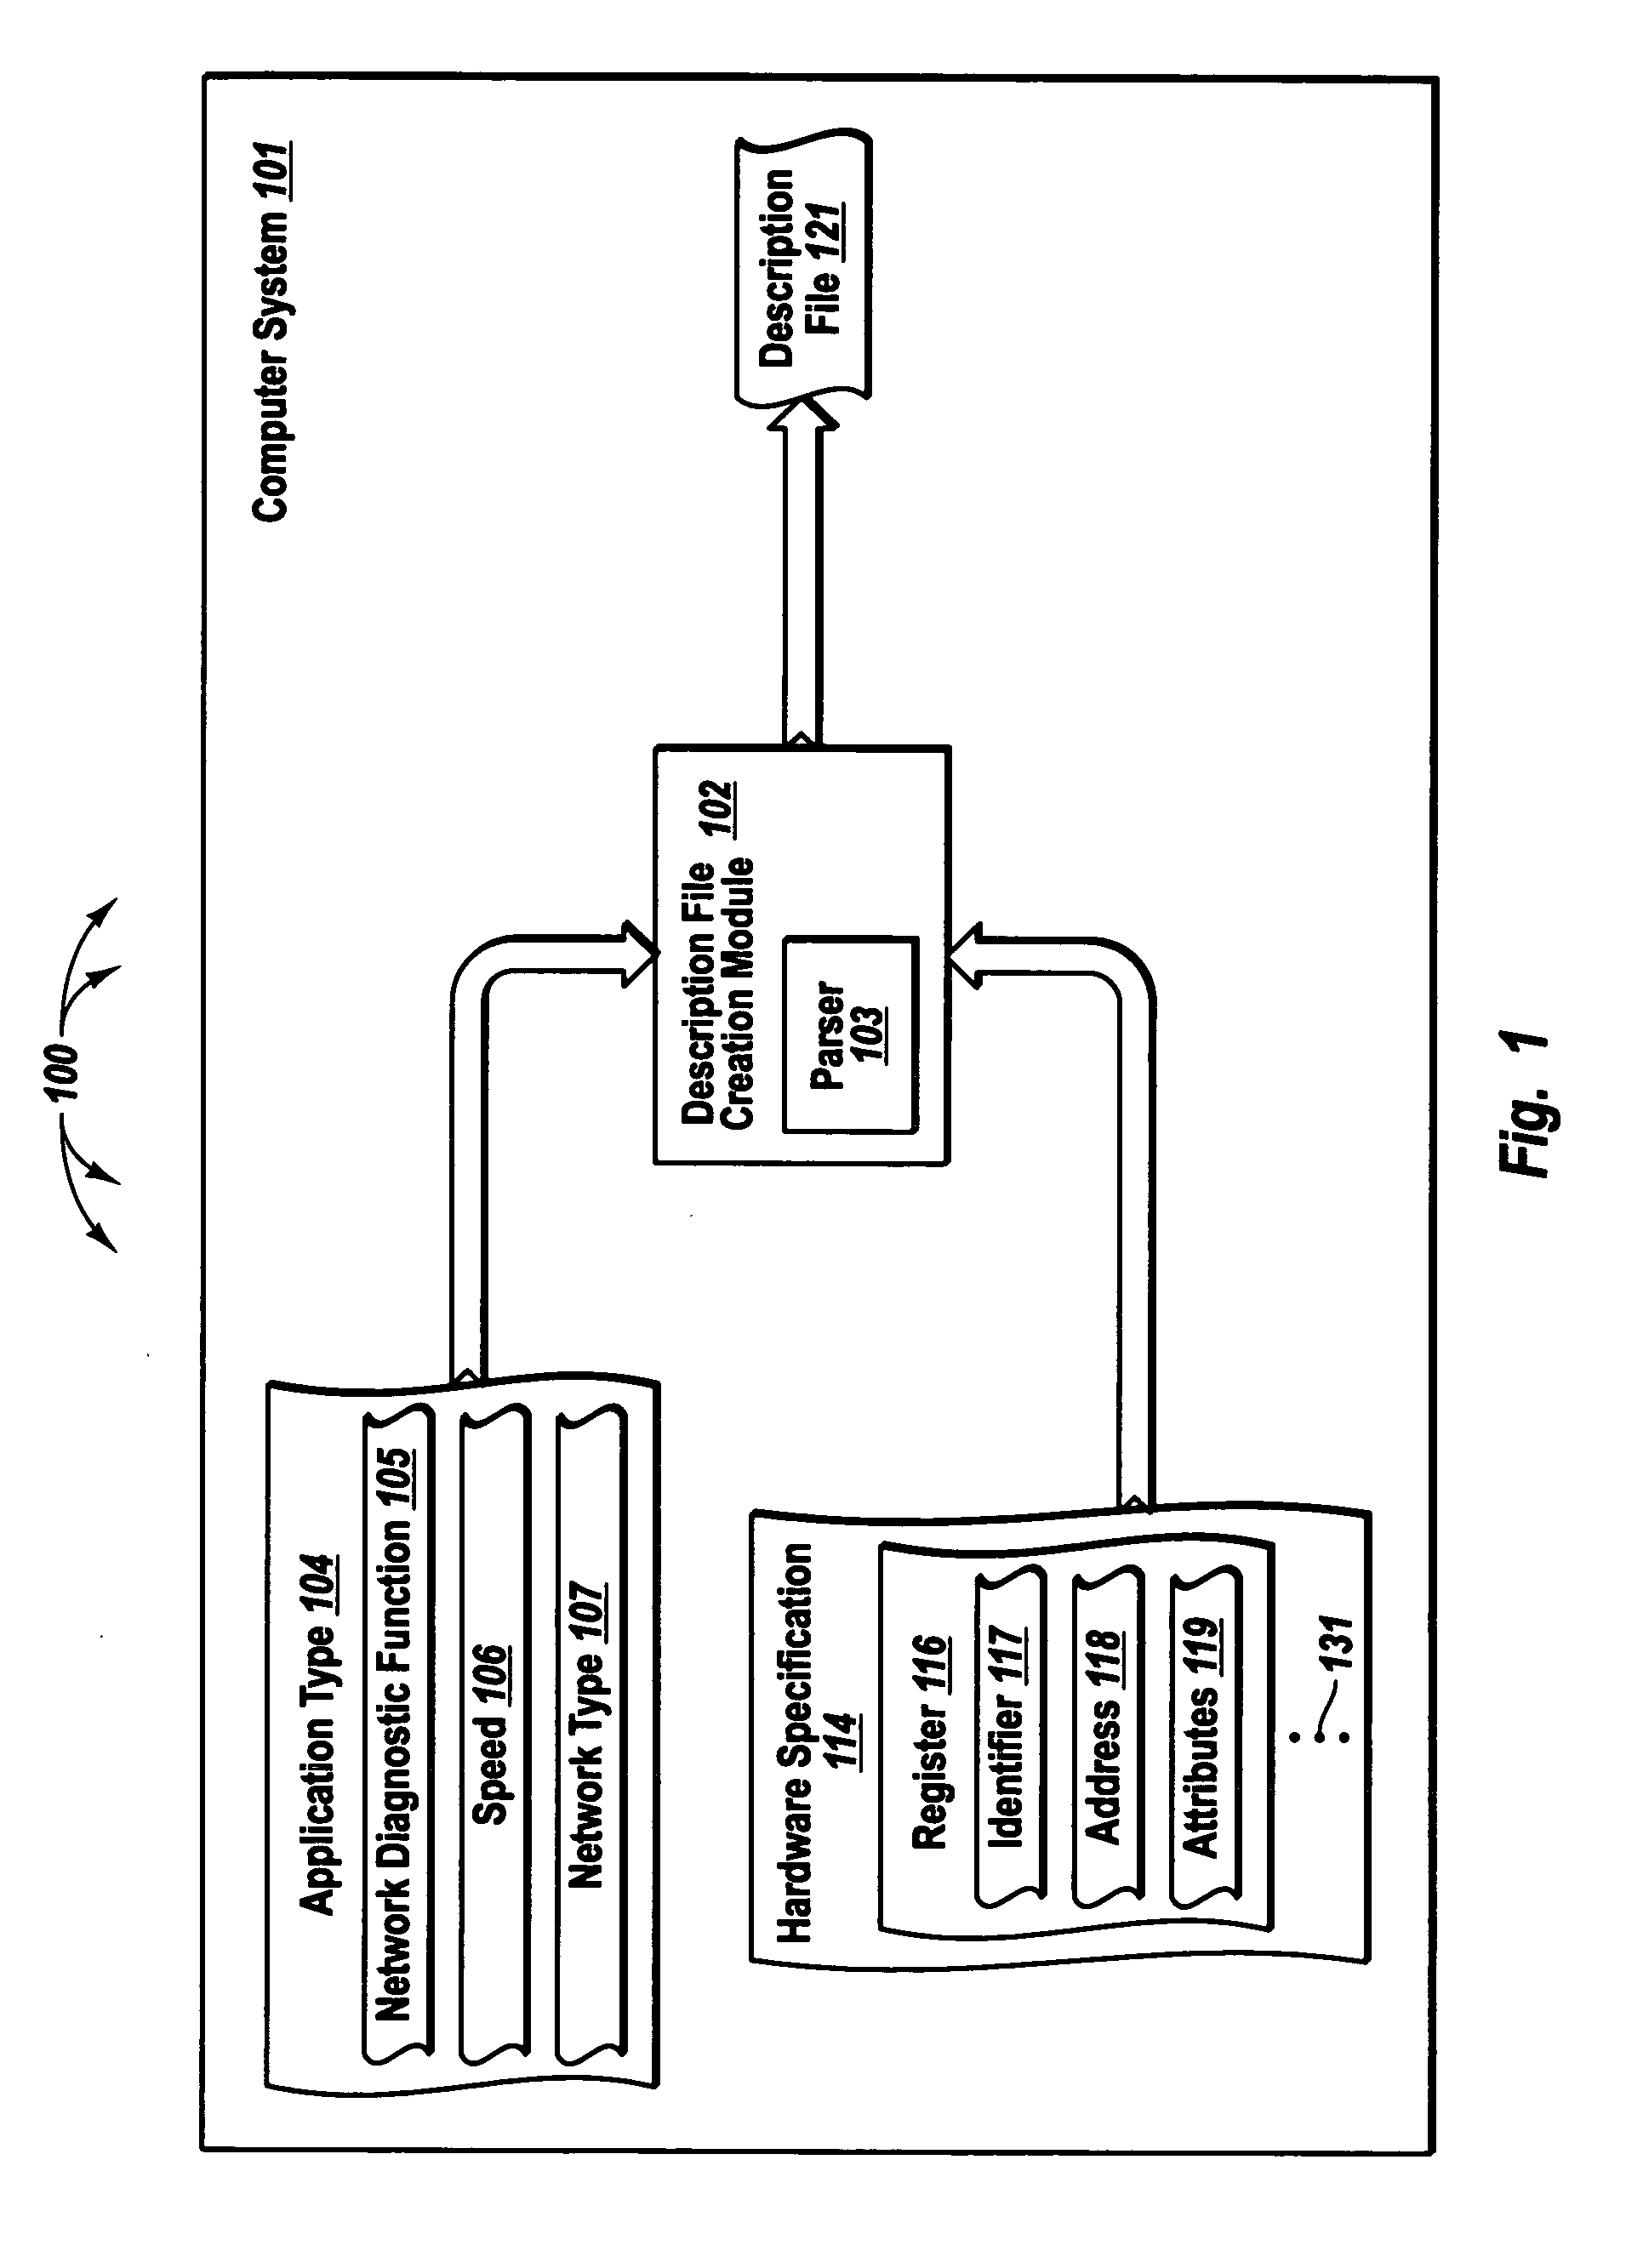 Creating description files used to configure components in a distributed system